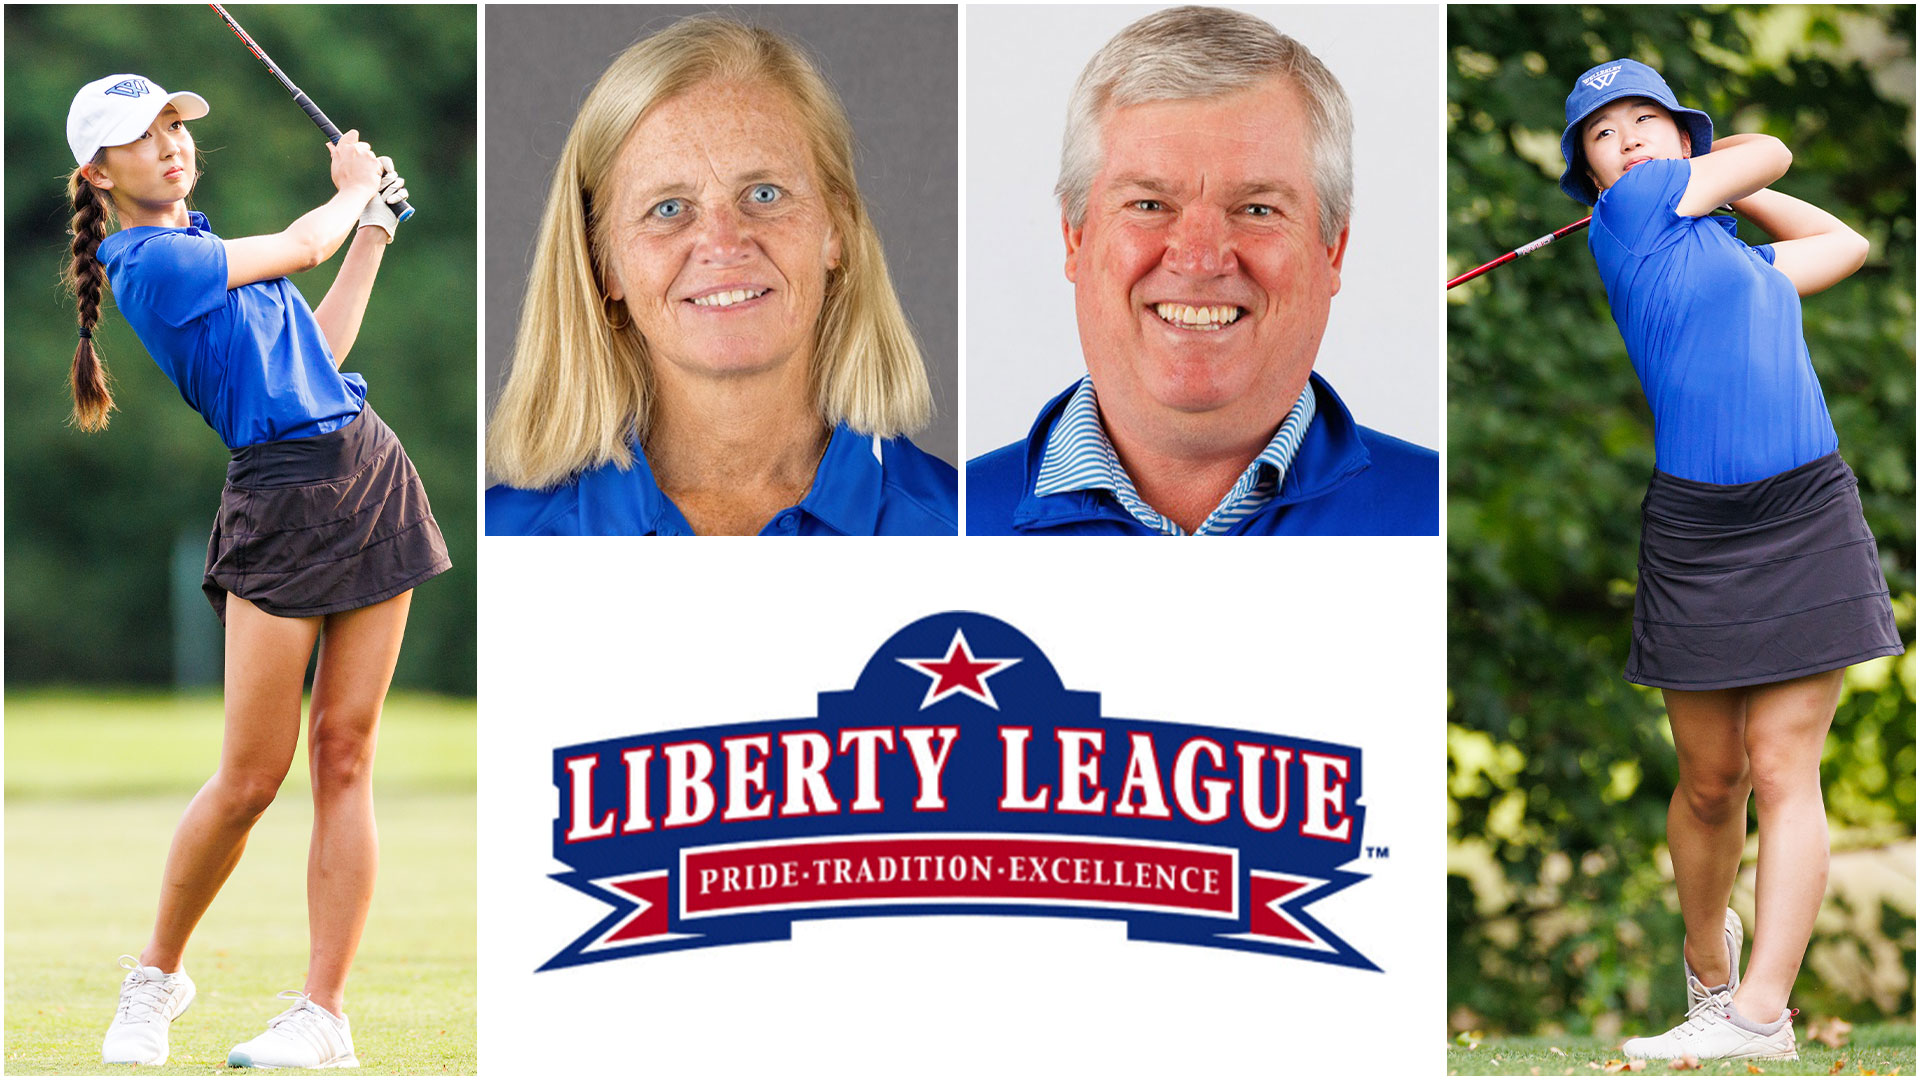 Wellesley College golf earned the Liberty League Performer, Rookie and Coach Staff of the Year (Frank Poulin)